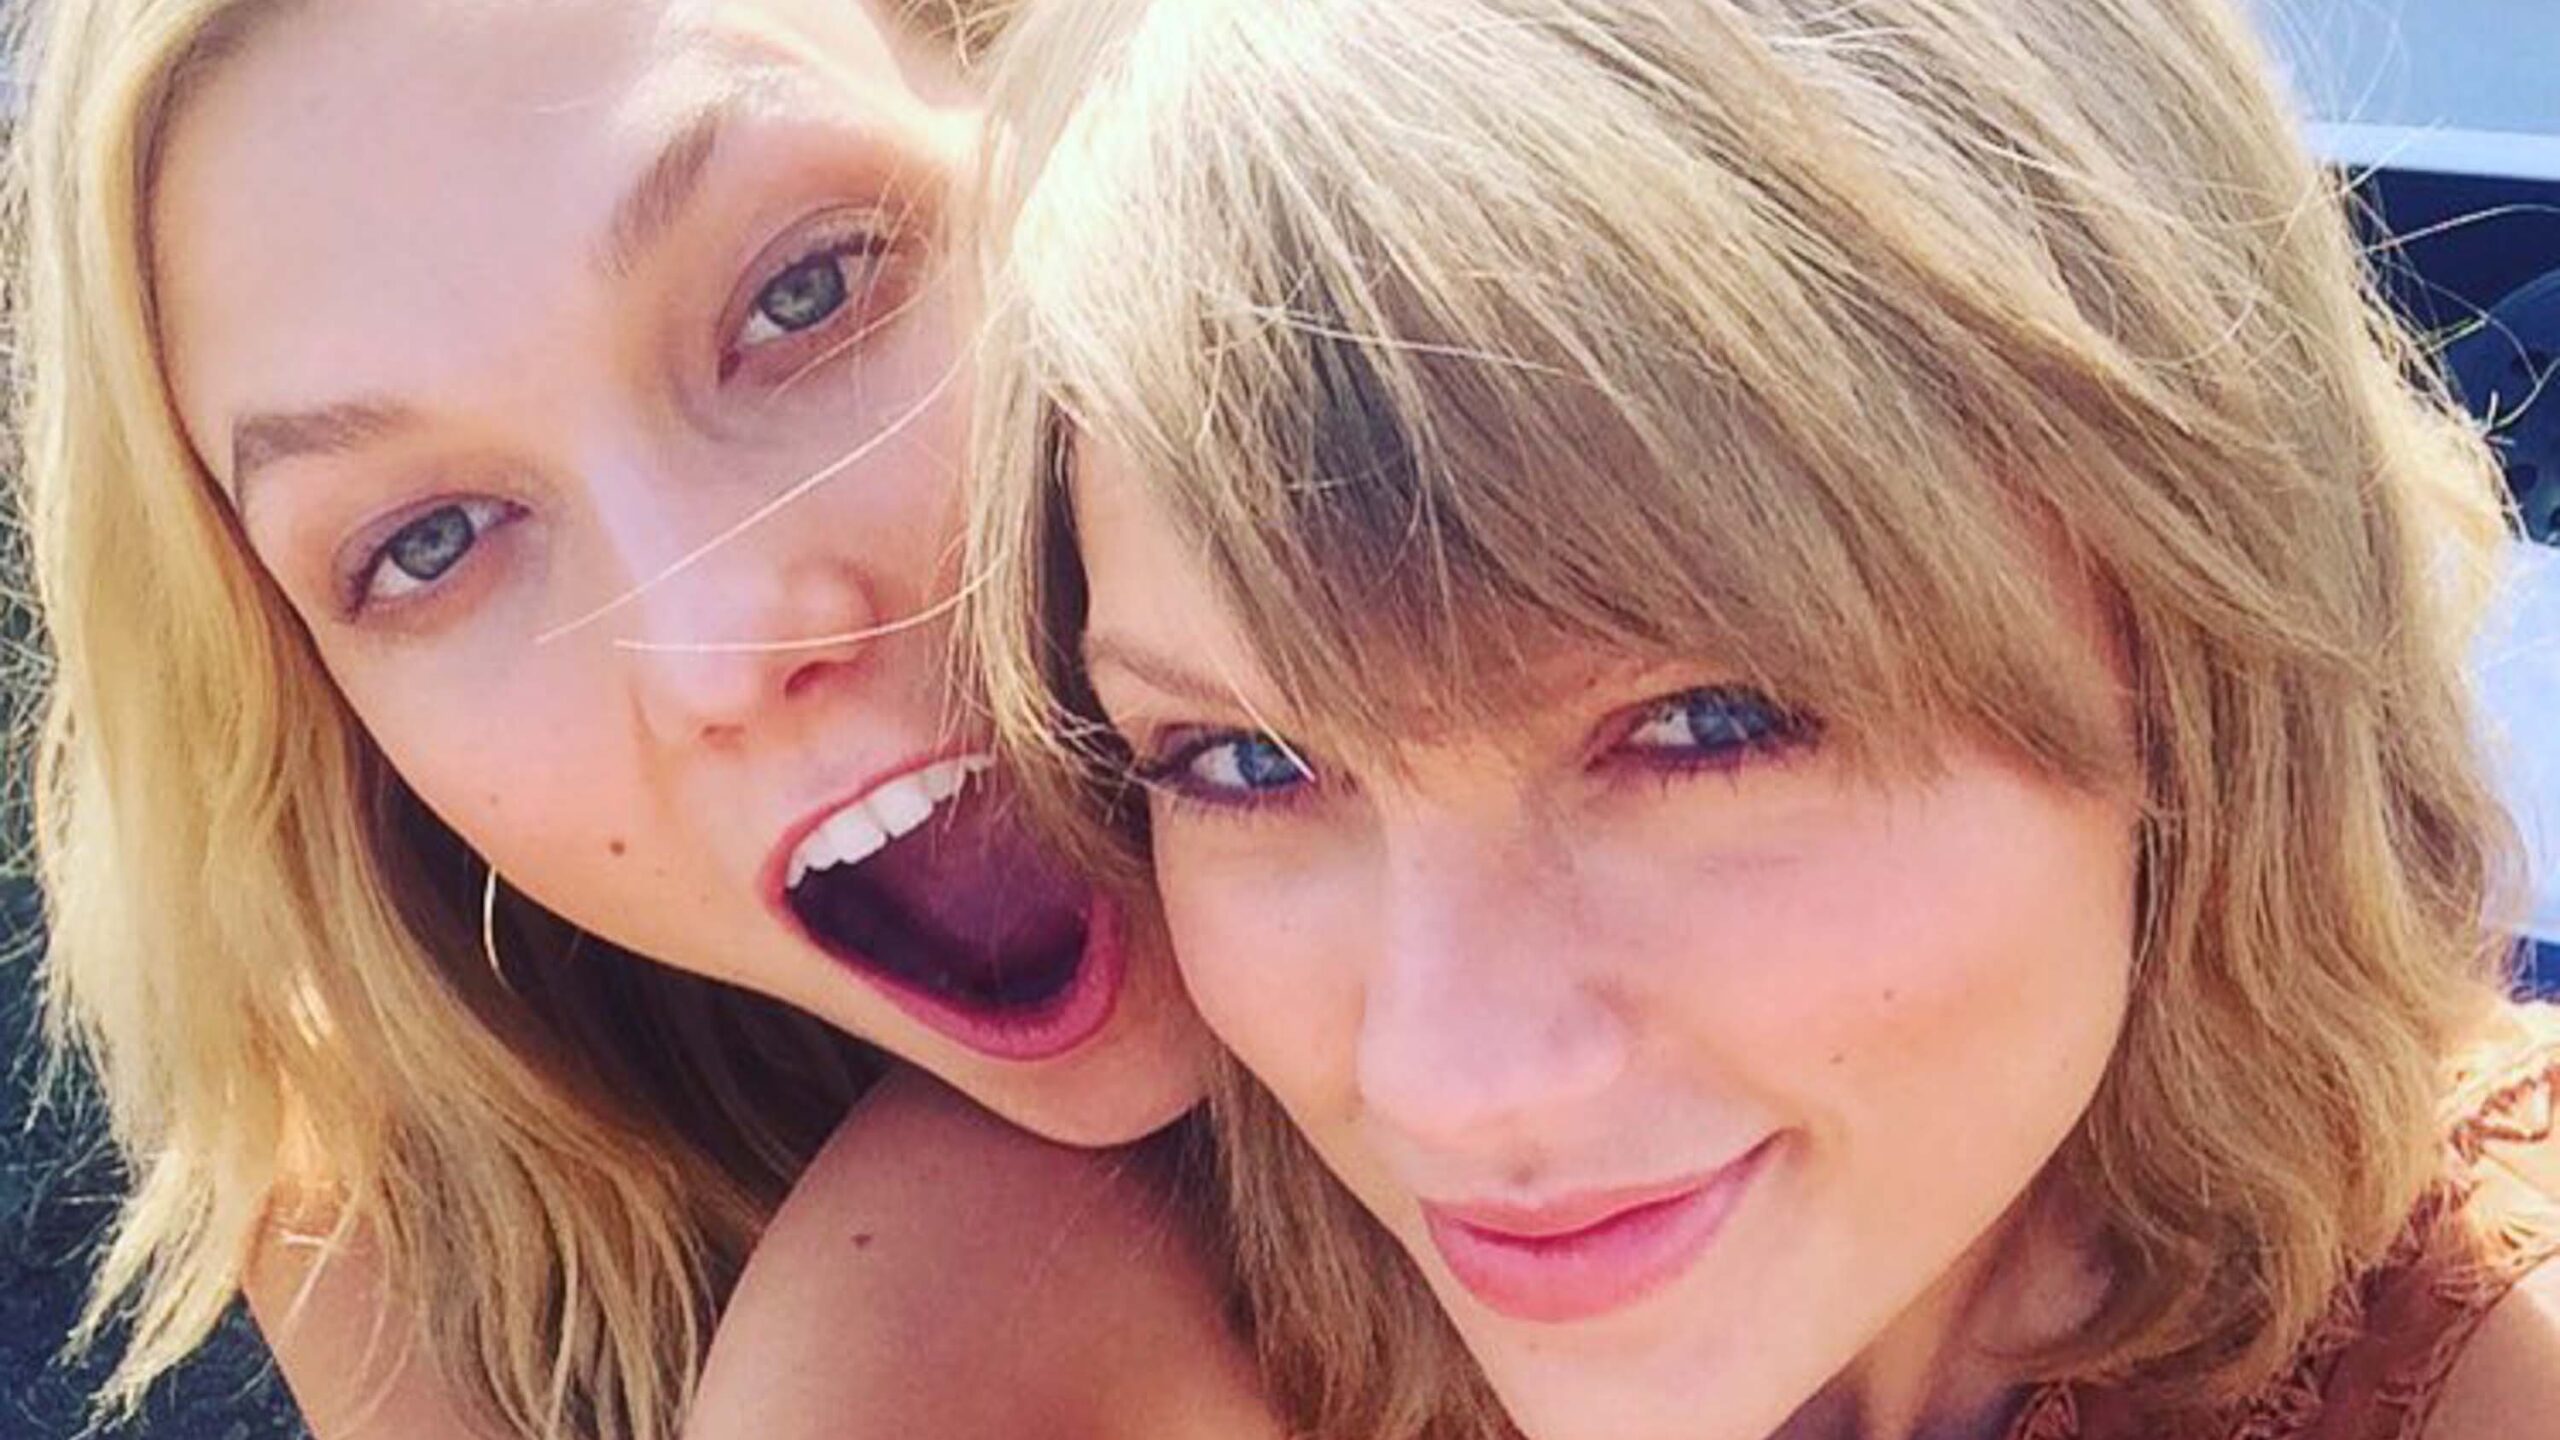 Here’s what Karlie Kloss has to say about her friendship with Taylor Swift